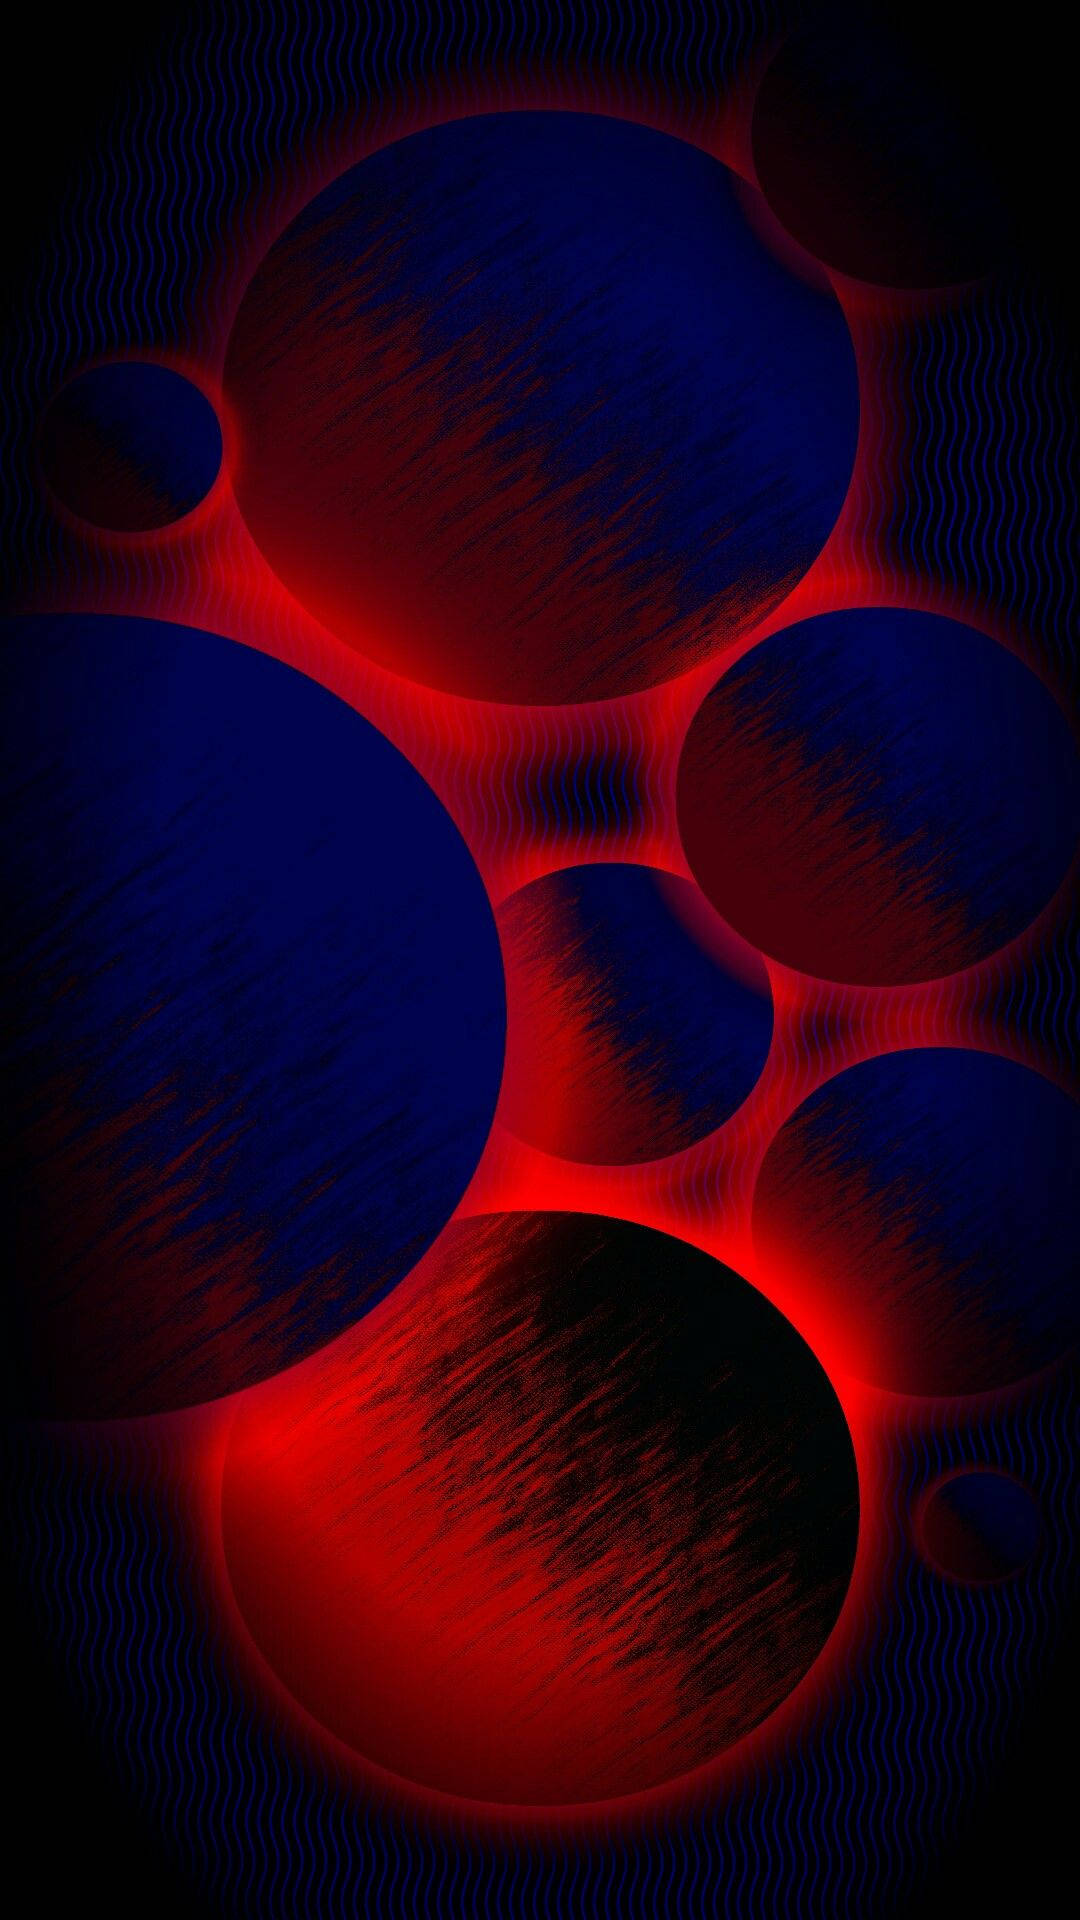 Red And Blue Spheres Background